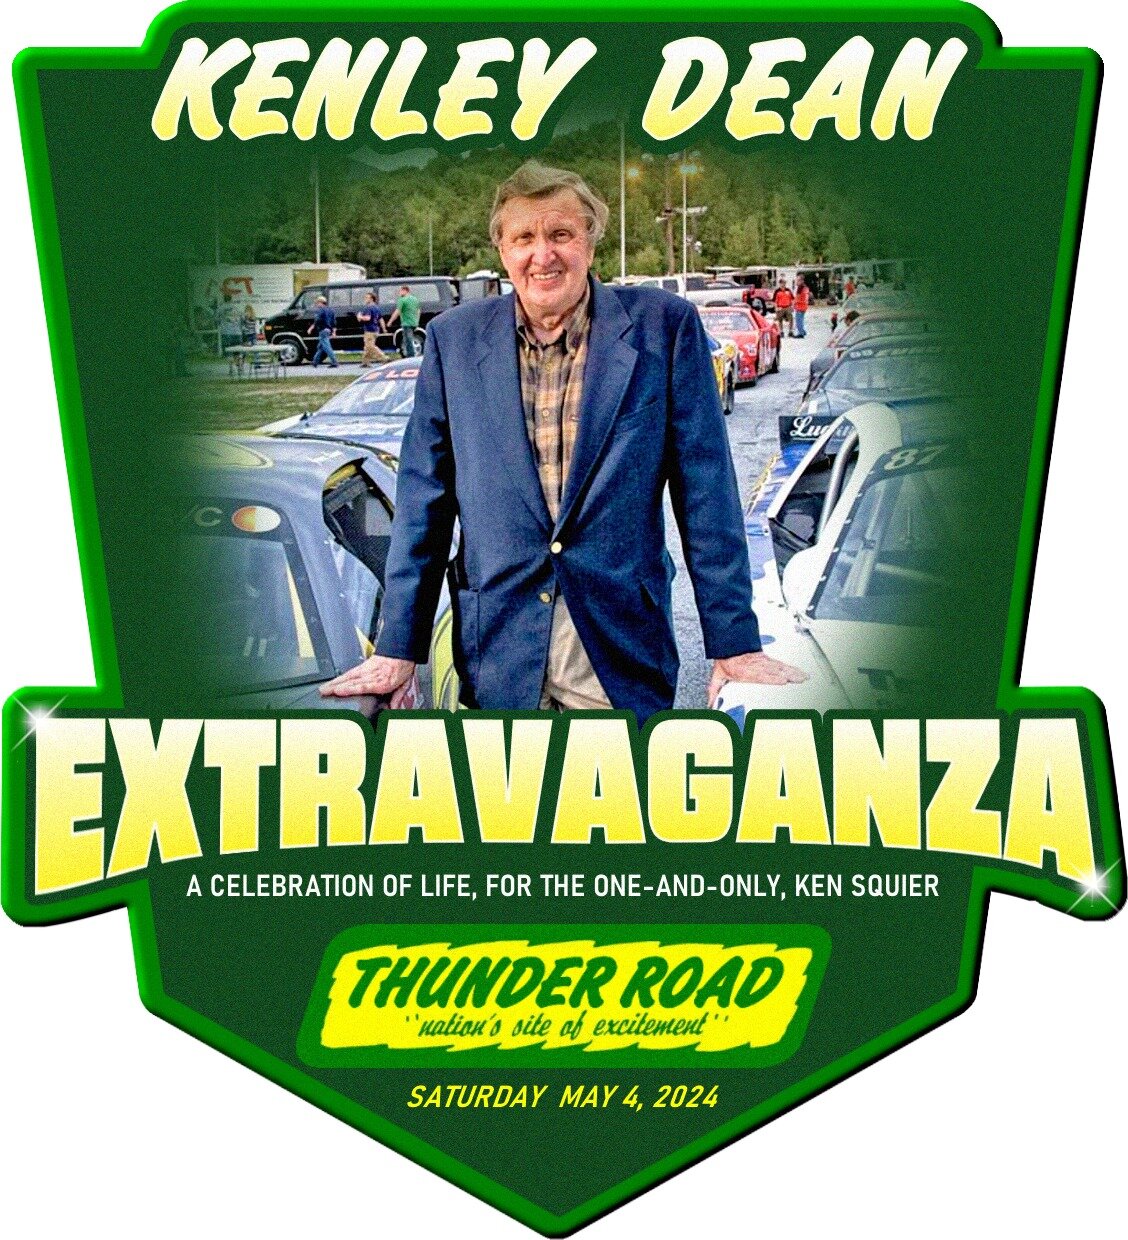 Thunder Road Officials, along with the Squier Family, are proud to announce that the Kenley Dean Extravaganza - A Celebration of Life for the One-and-Only Ken Squier is scheduled for Saturday, May 4th at his Nation's Site of Excitement.
For more deta